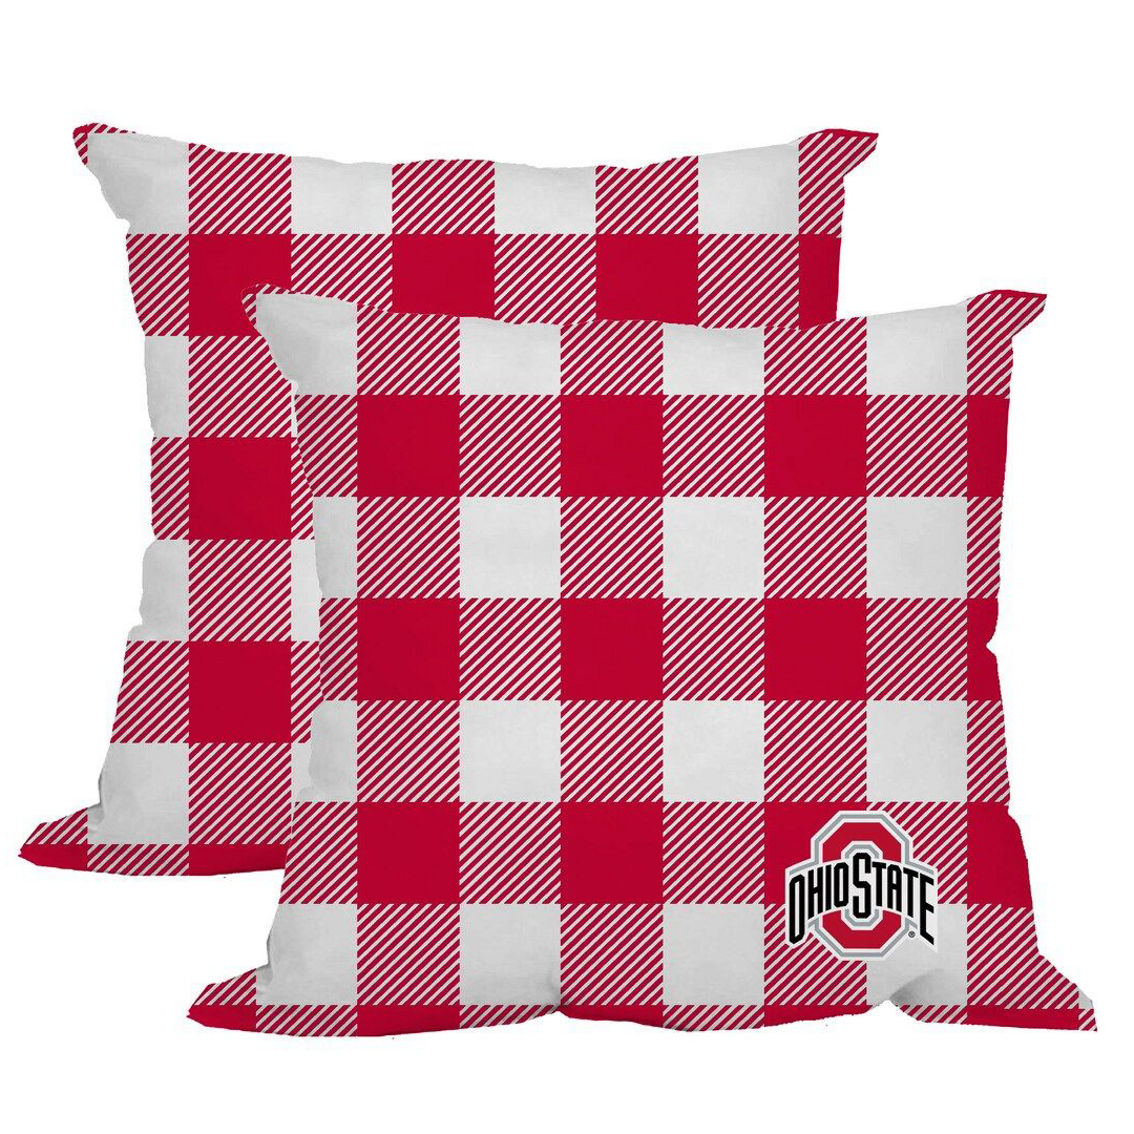 Logo Brands Ohio State Buckeyes 2-Pack Buffalo Check Plaid Outdoor Pillow Set - Image 1 of 2